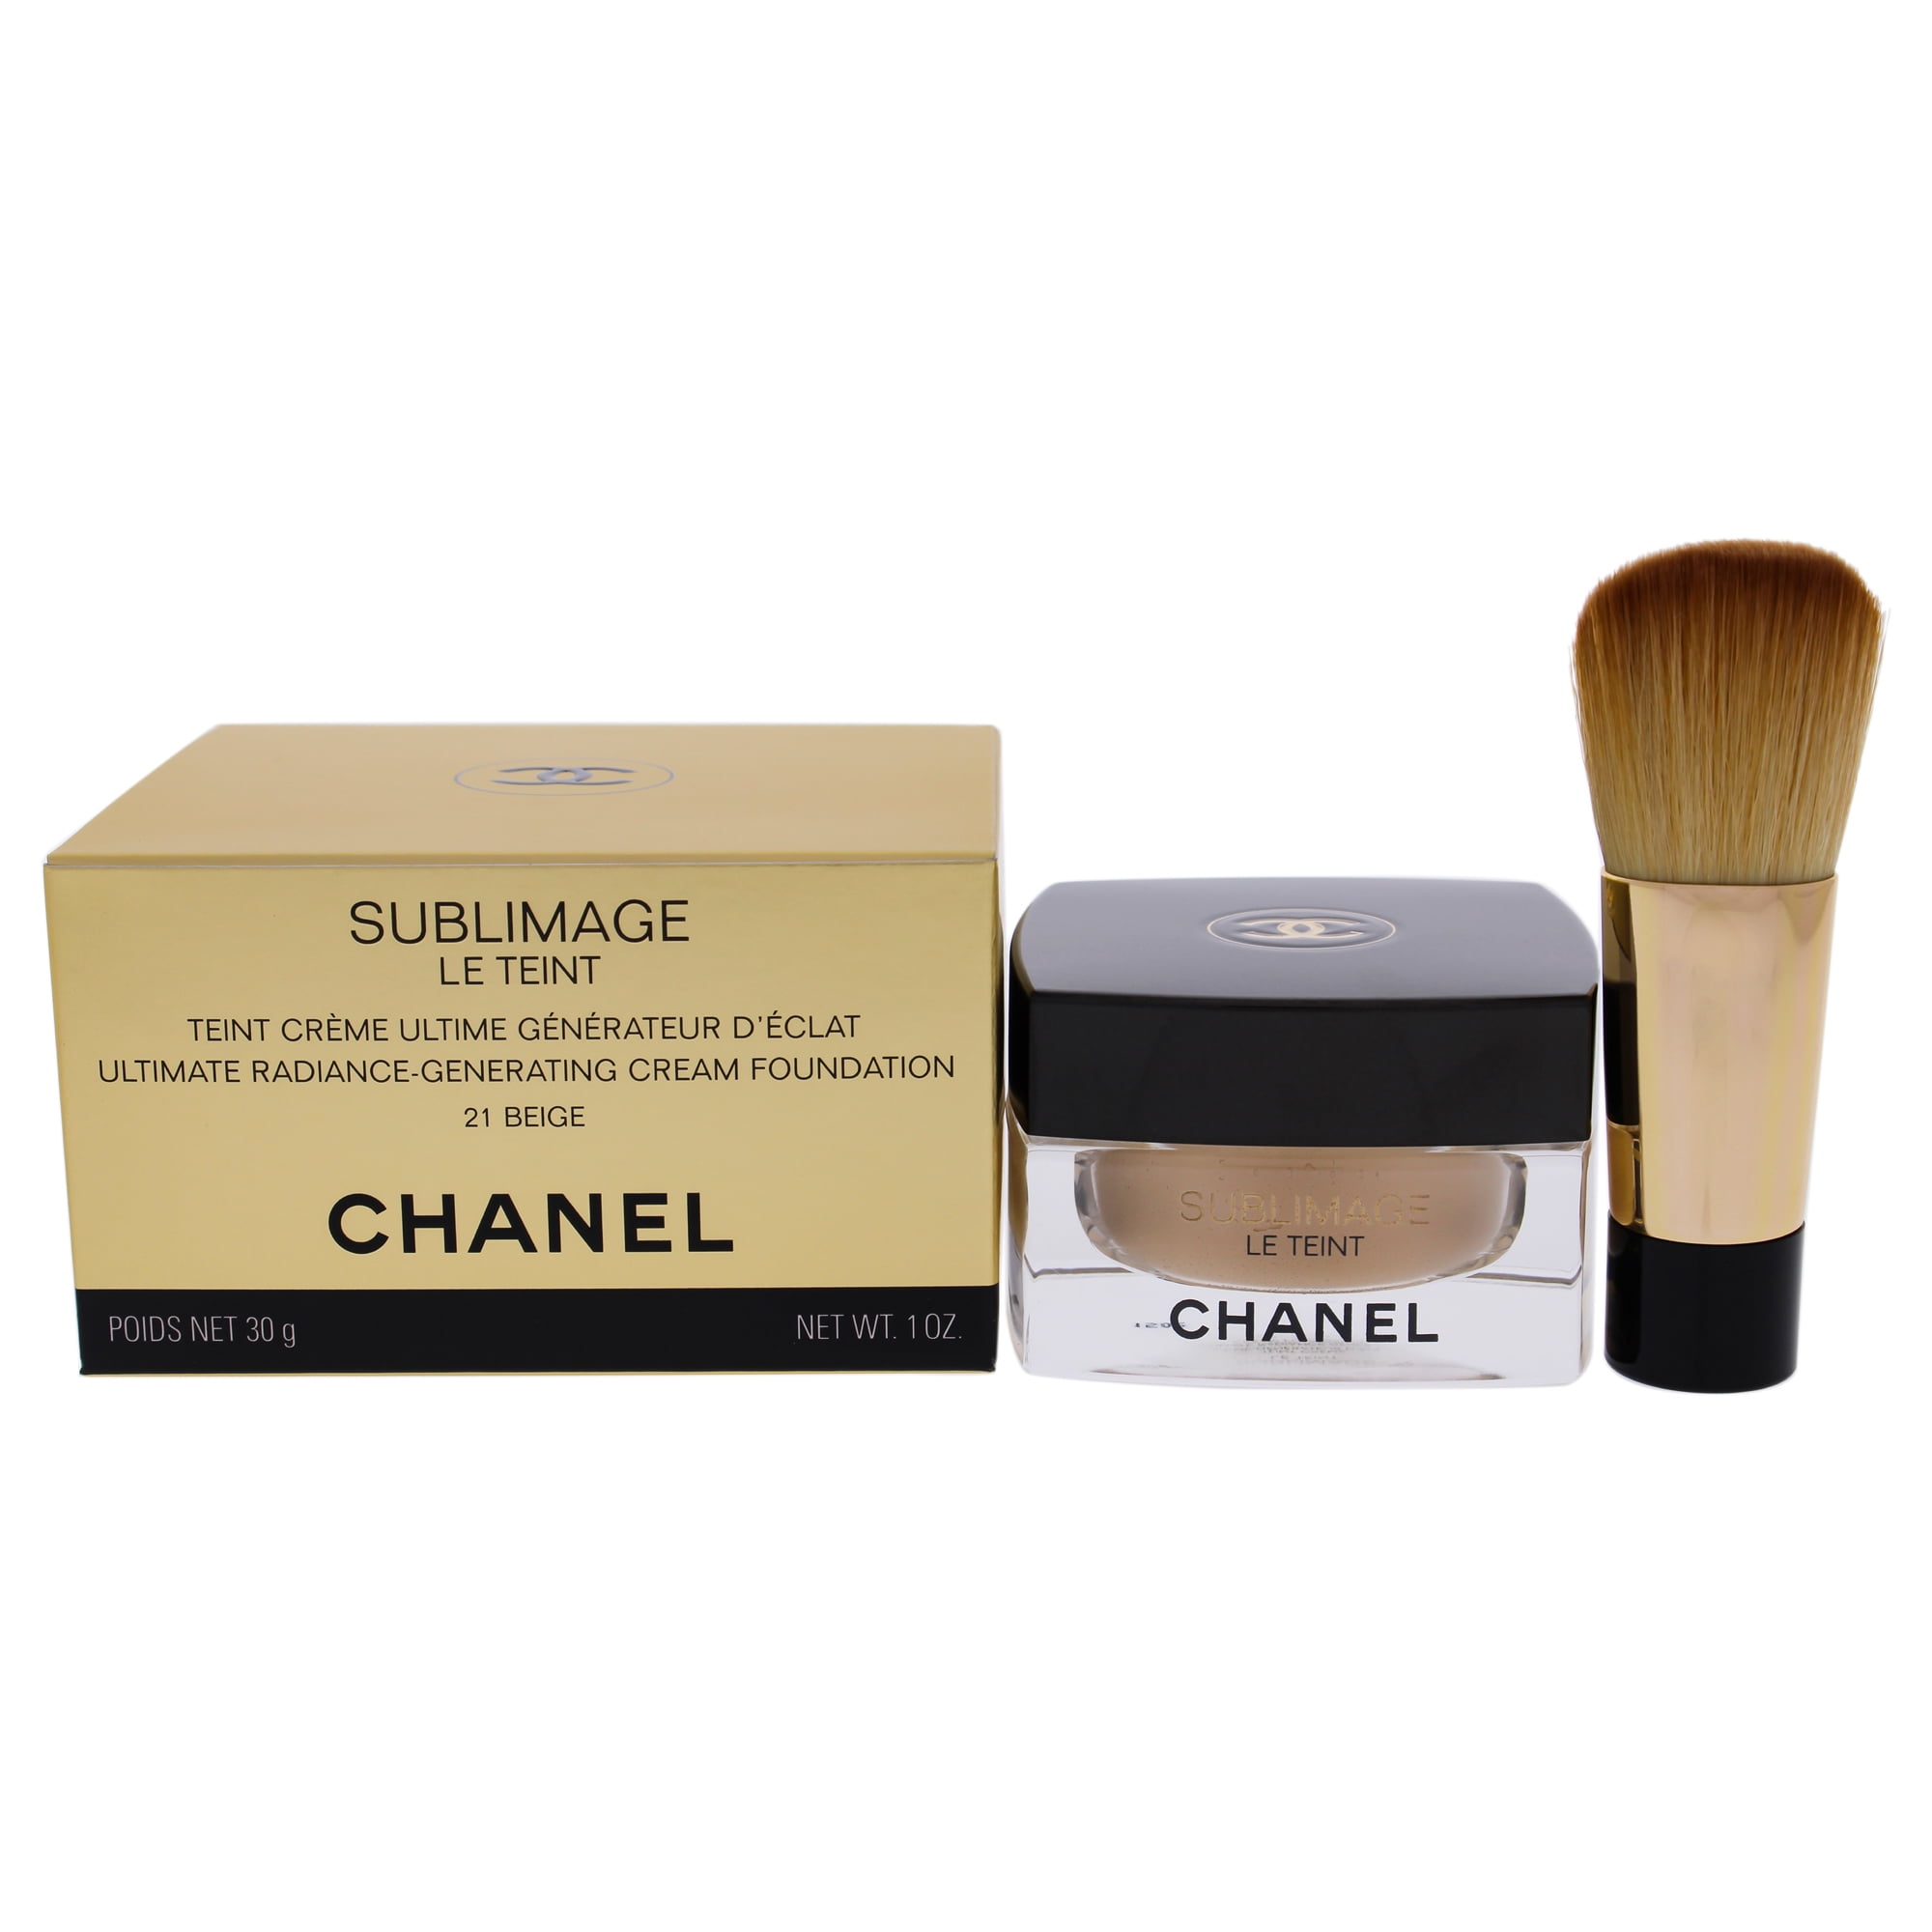 Chanel sublimage Le teint cream foundation, Beauty & Personal Care, Face,  Makeup on Carousell